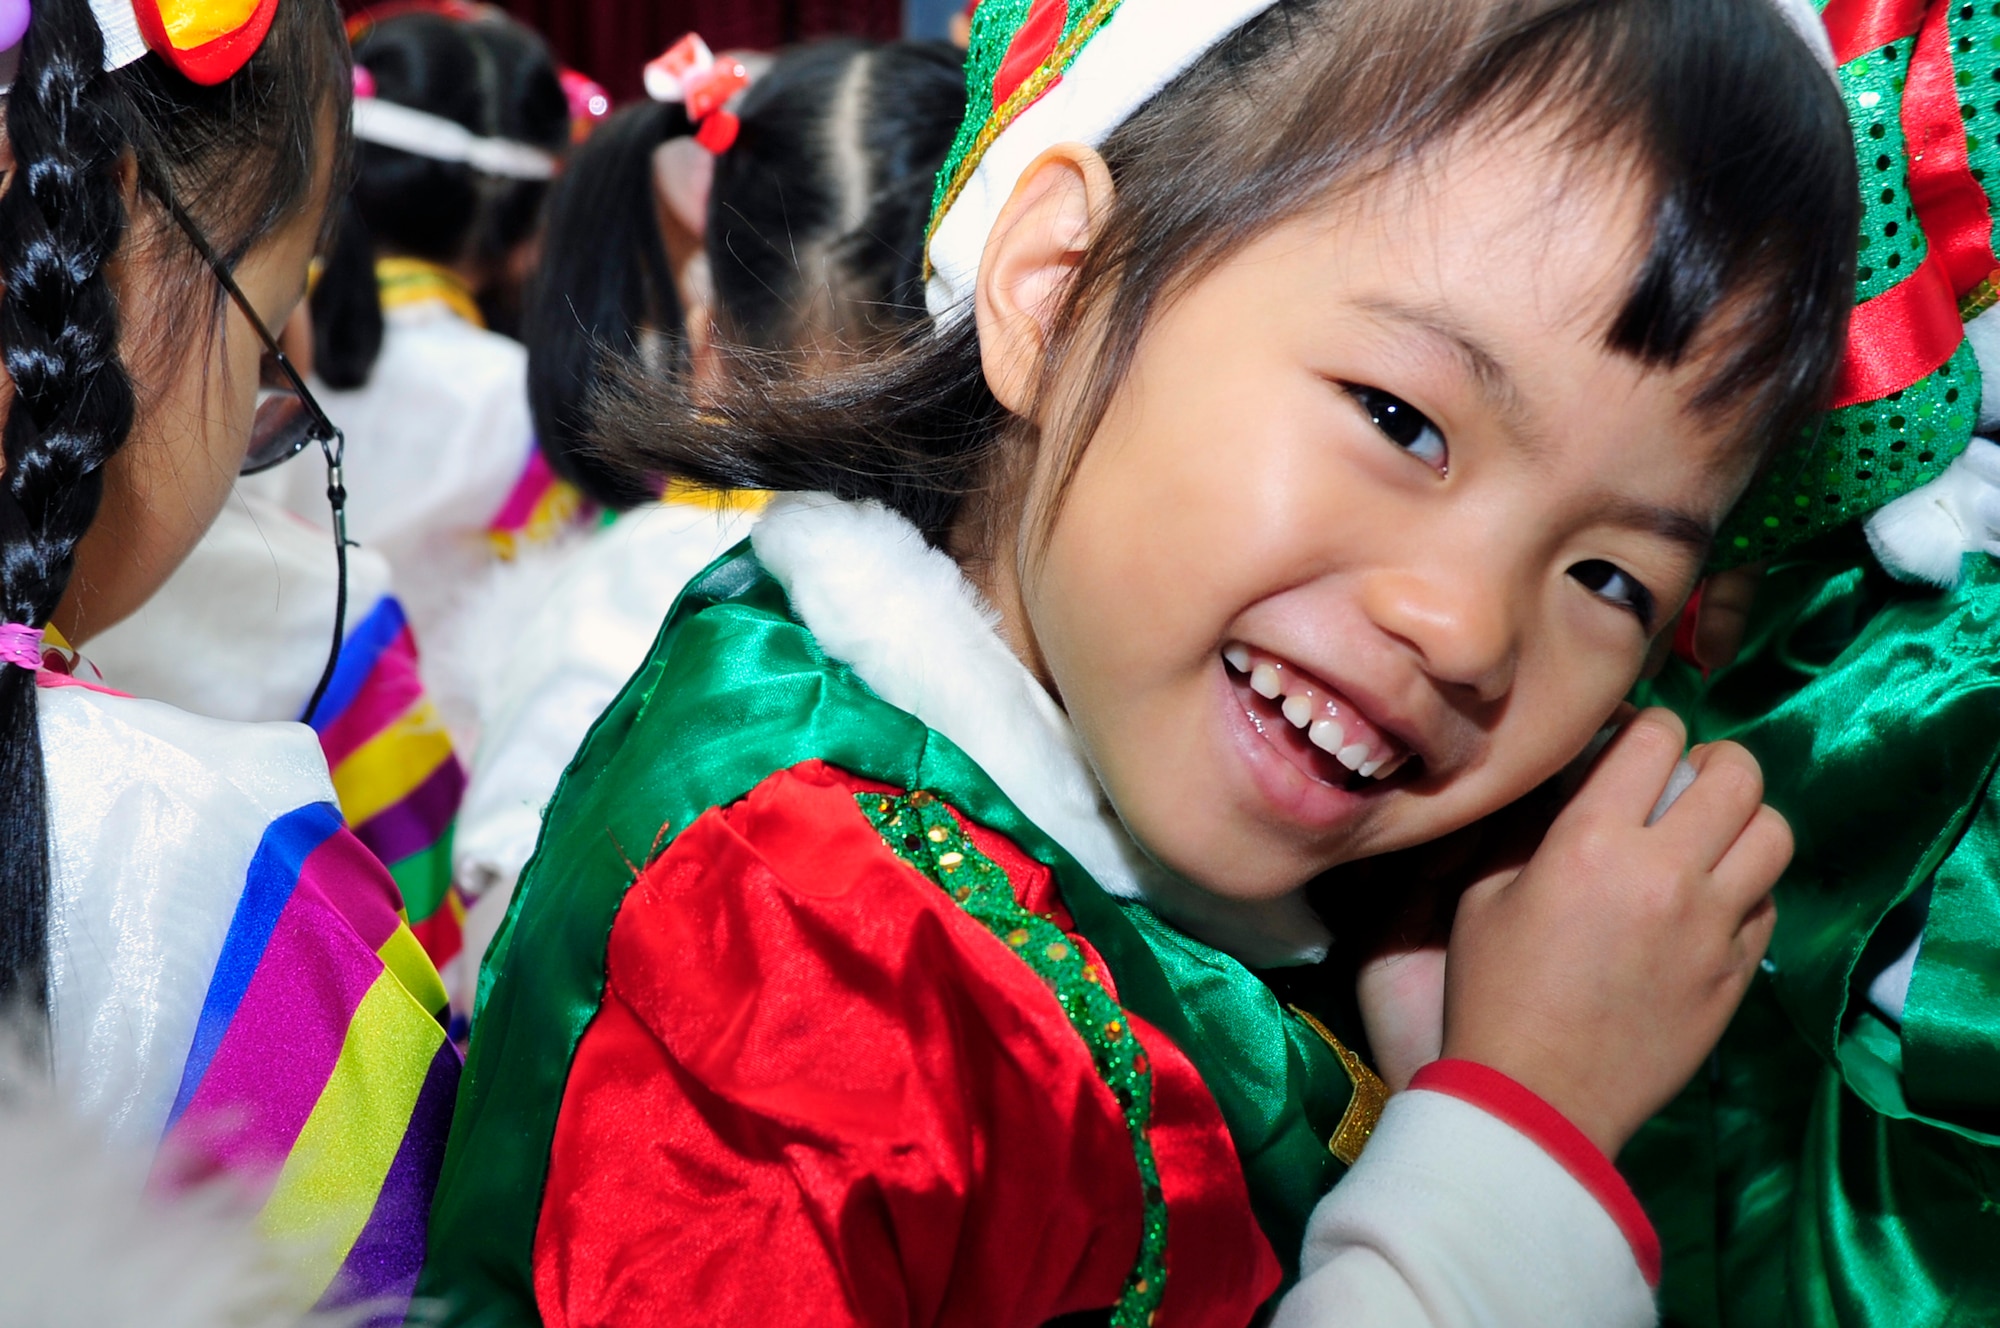 A Korean orphan smiles for a photo at a Korean orphanage Dec. 22, 2012. Team Osan gave back during the holidays by ensuring children in local orphanages received a little bit of cheer and a gift. (U.S. Air Force photo/Airman 1st Class Alexis Siekert)